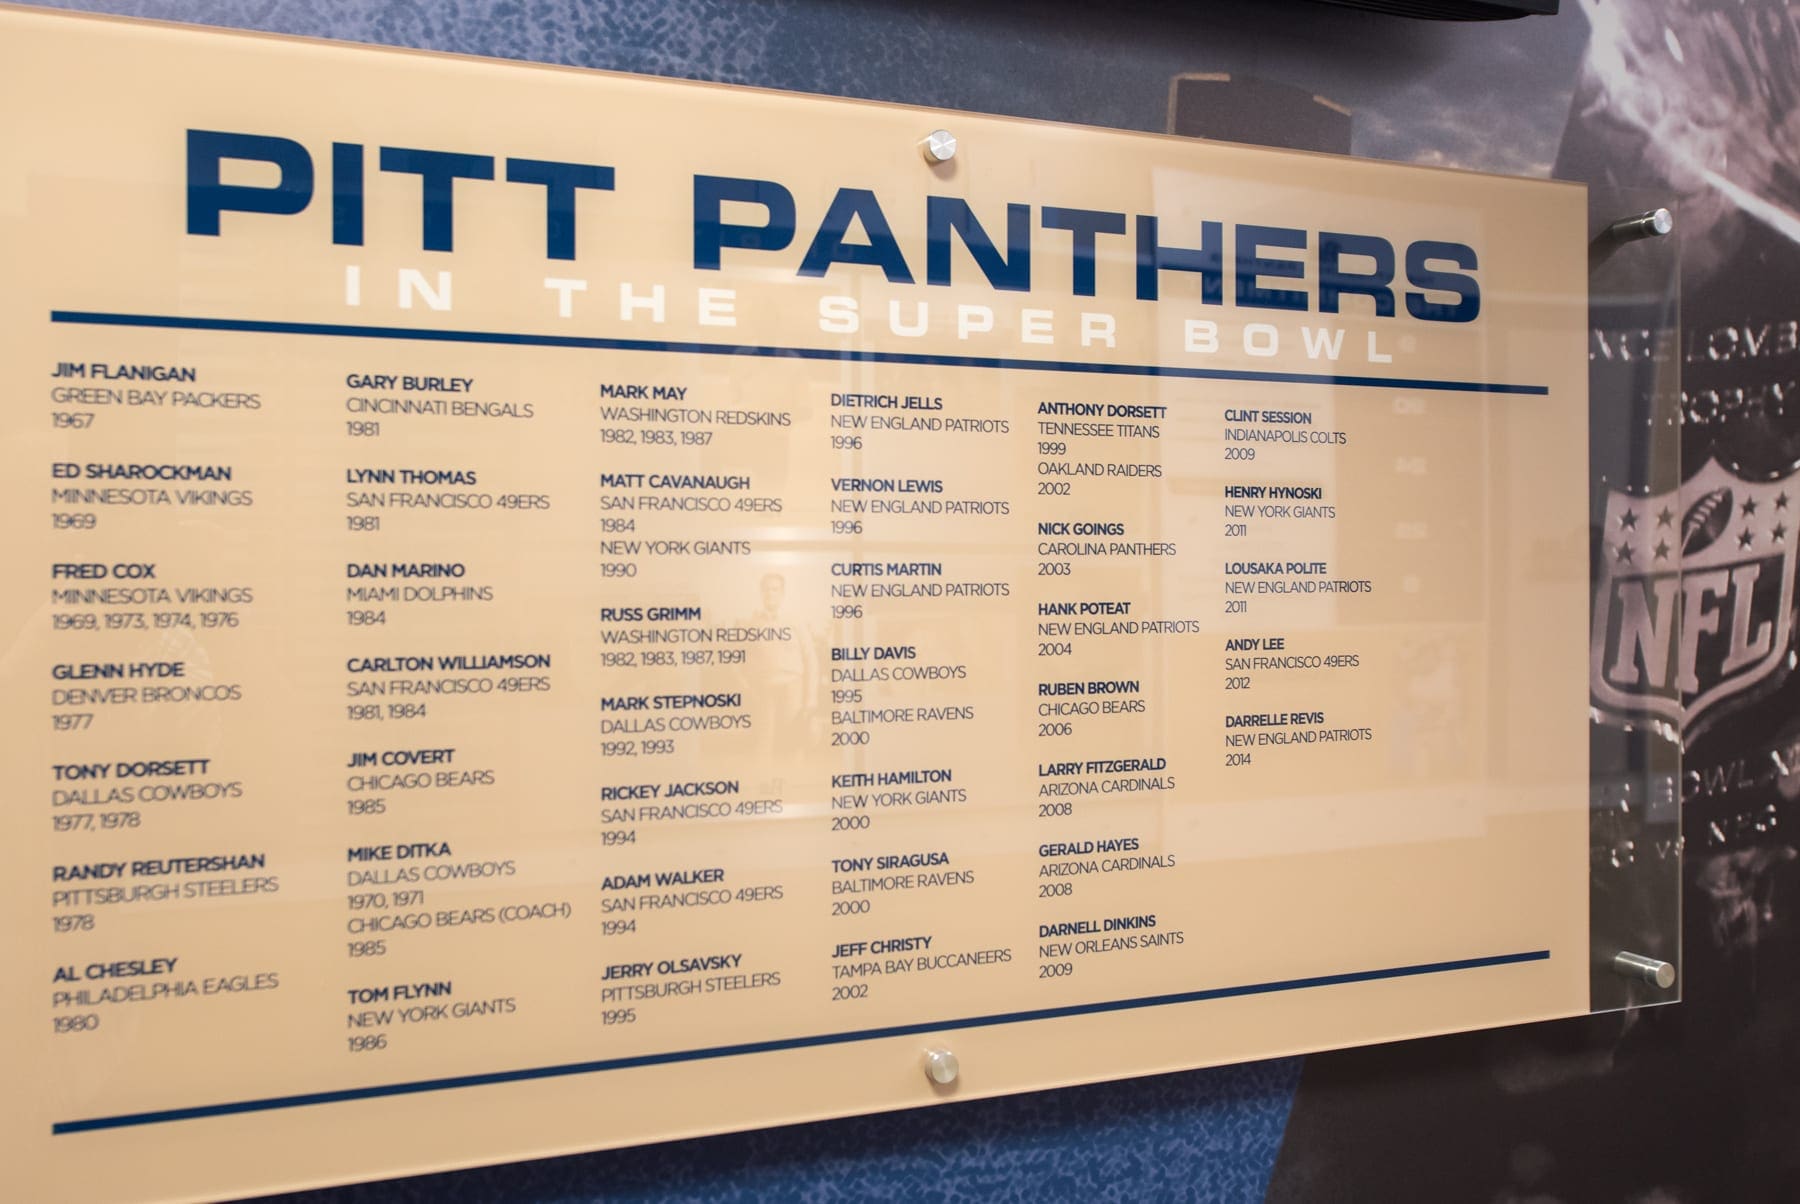 Pitt Panthers in the Super Bowl (Photo credit: Dave DiCello)